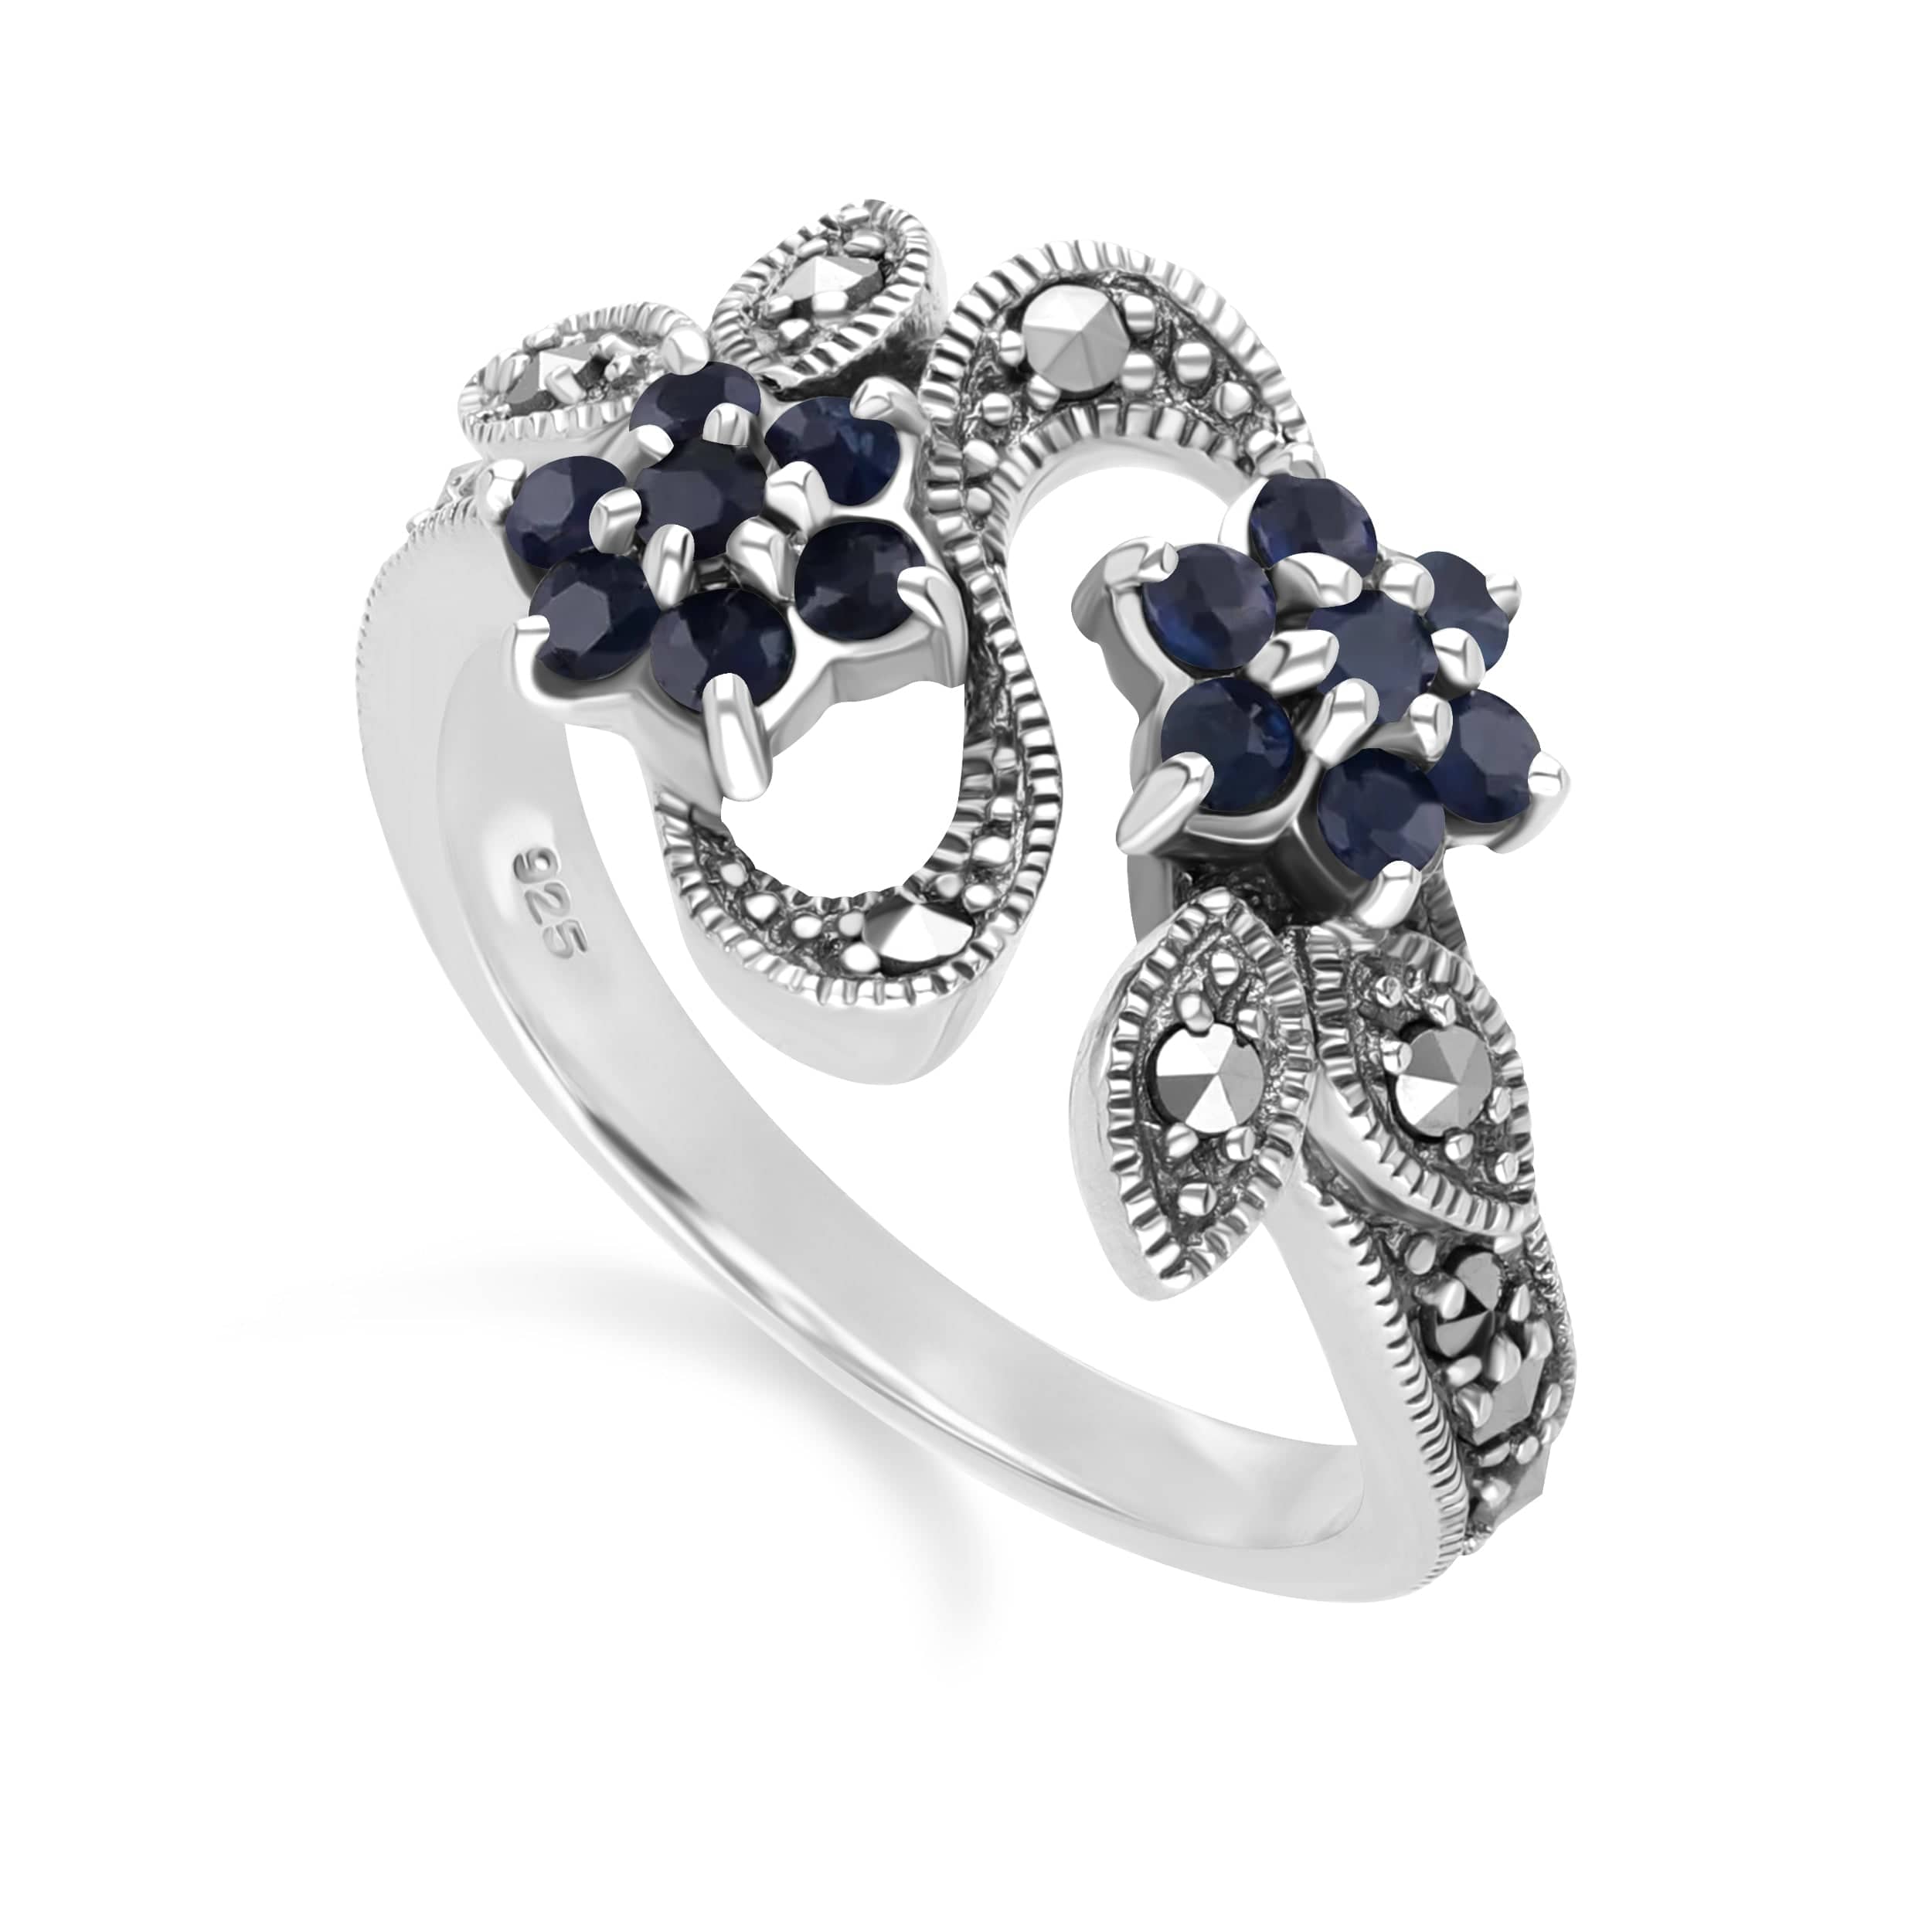 214R247404925 Art Nouveau Style Round Sapphire & Marcasite Flower Ring in 925 Sterling Silver 2